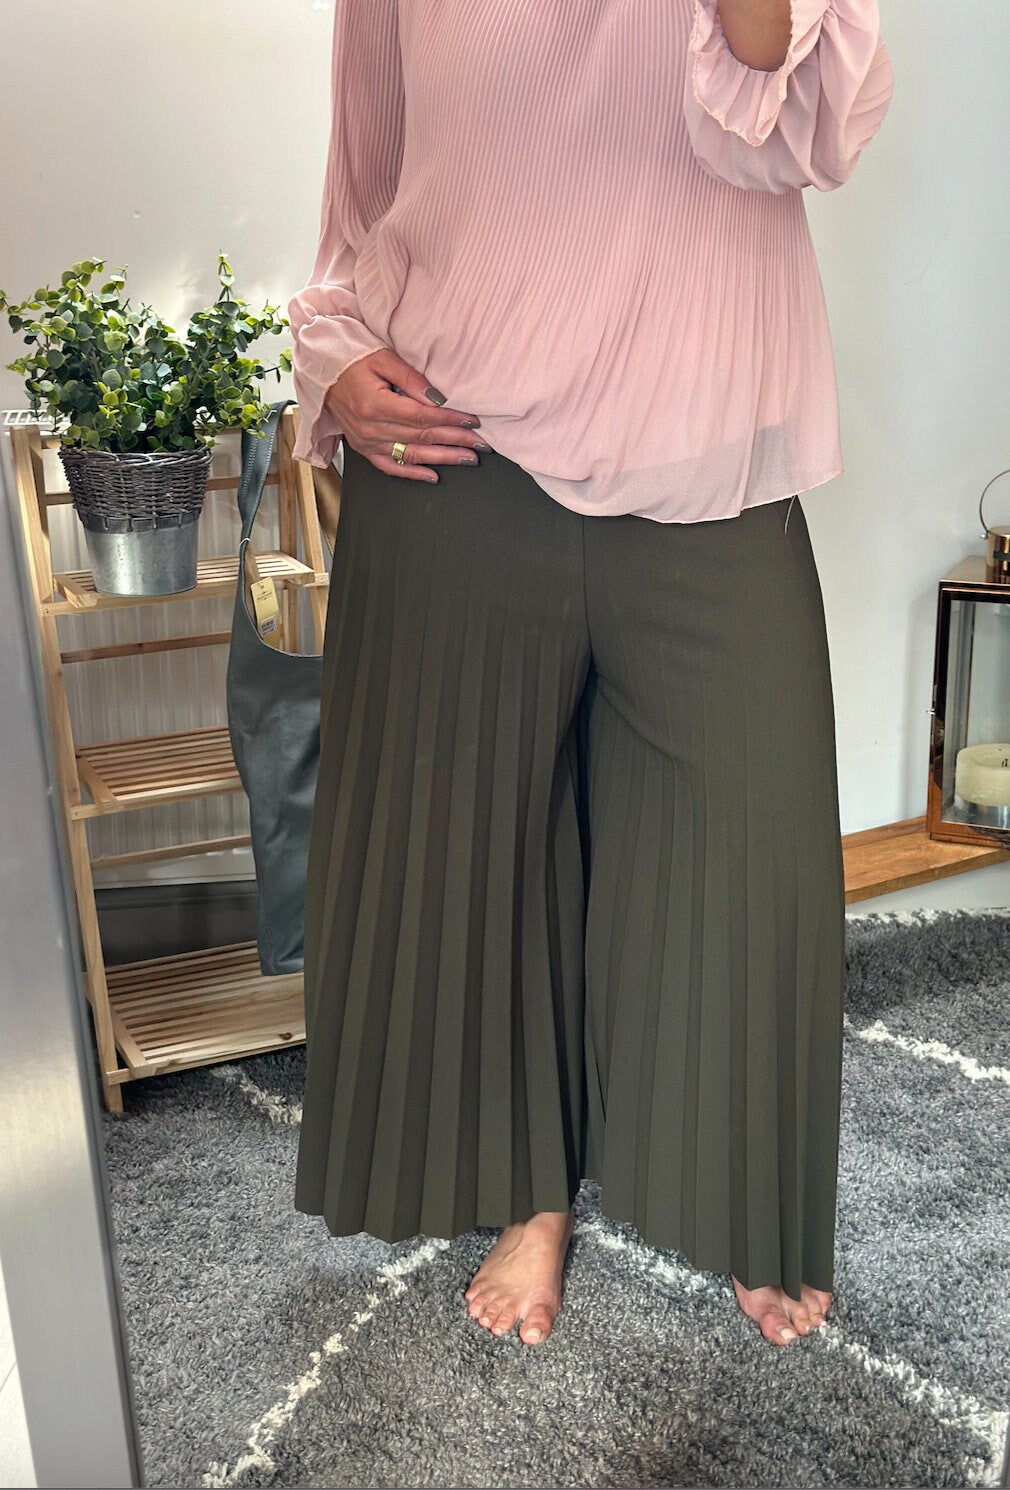 Made in Italy Khaki Culottes Wide Leg Chinos Pants Trousers, Mid Waist, Pleated Ankle-Length Comfort Plain